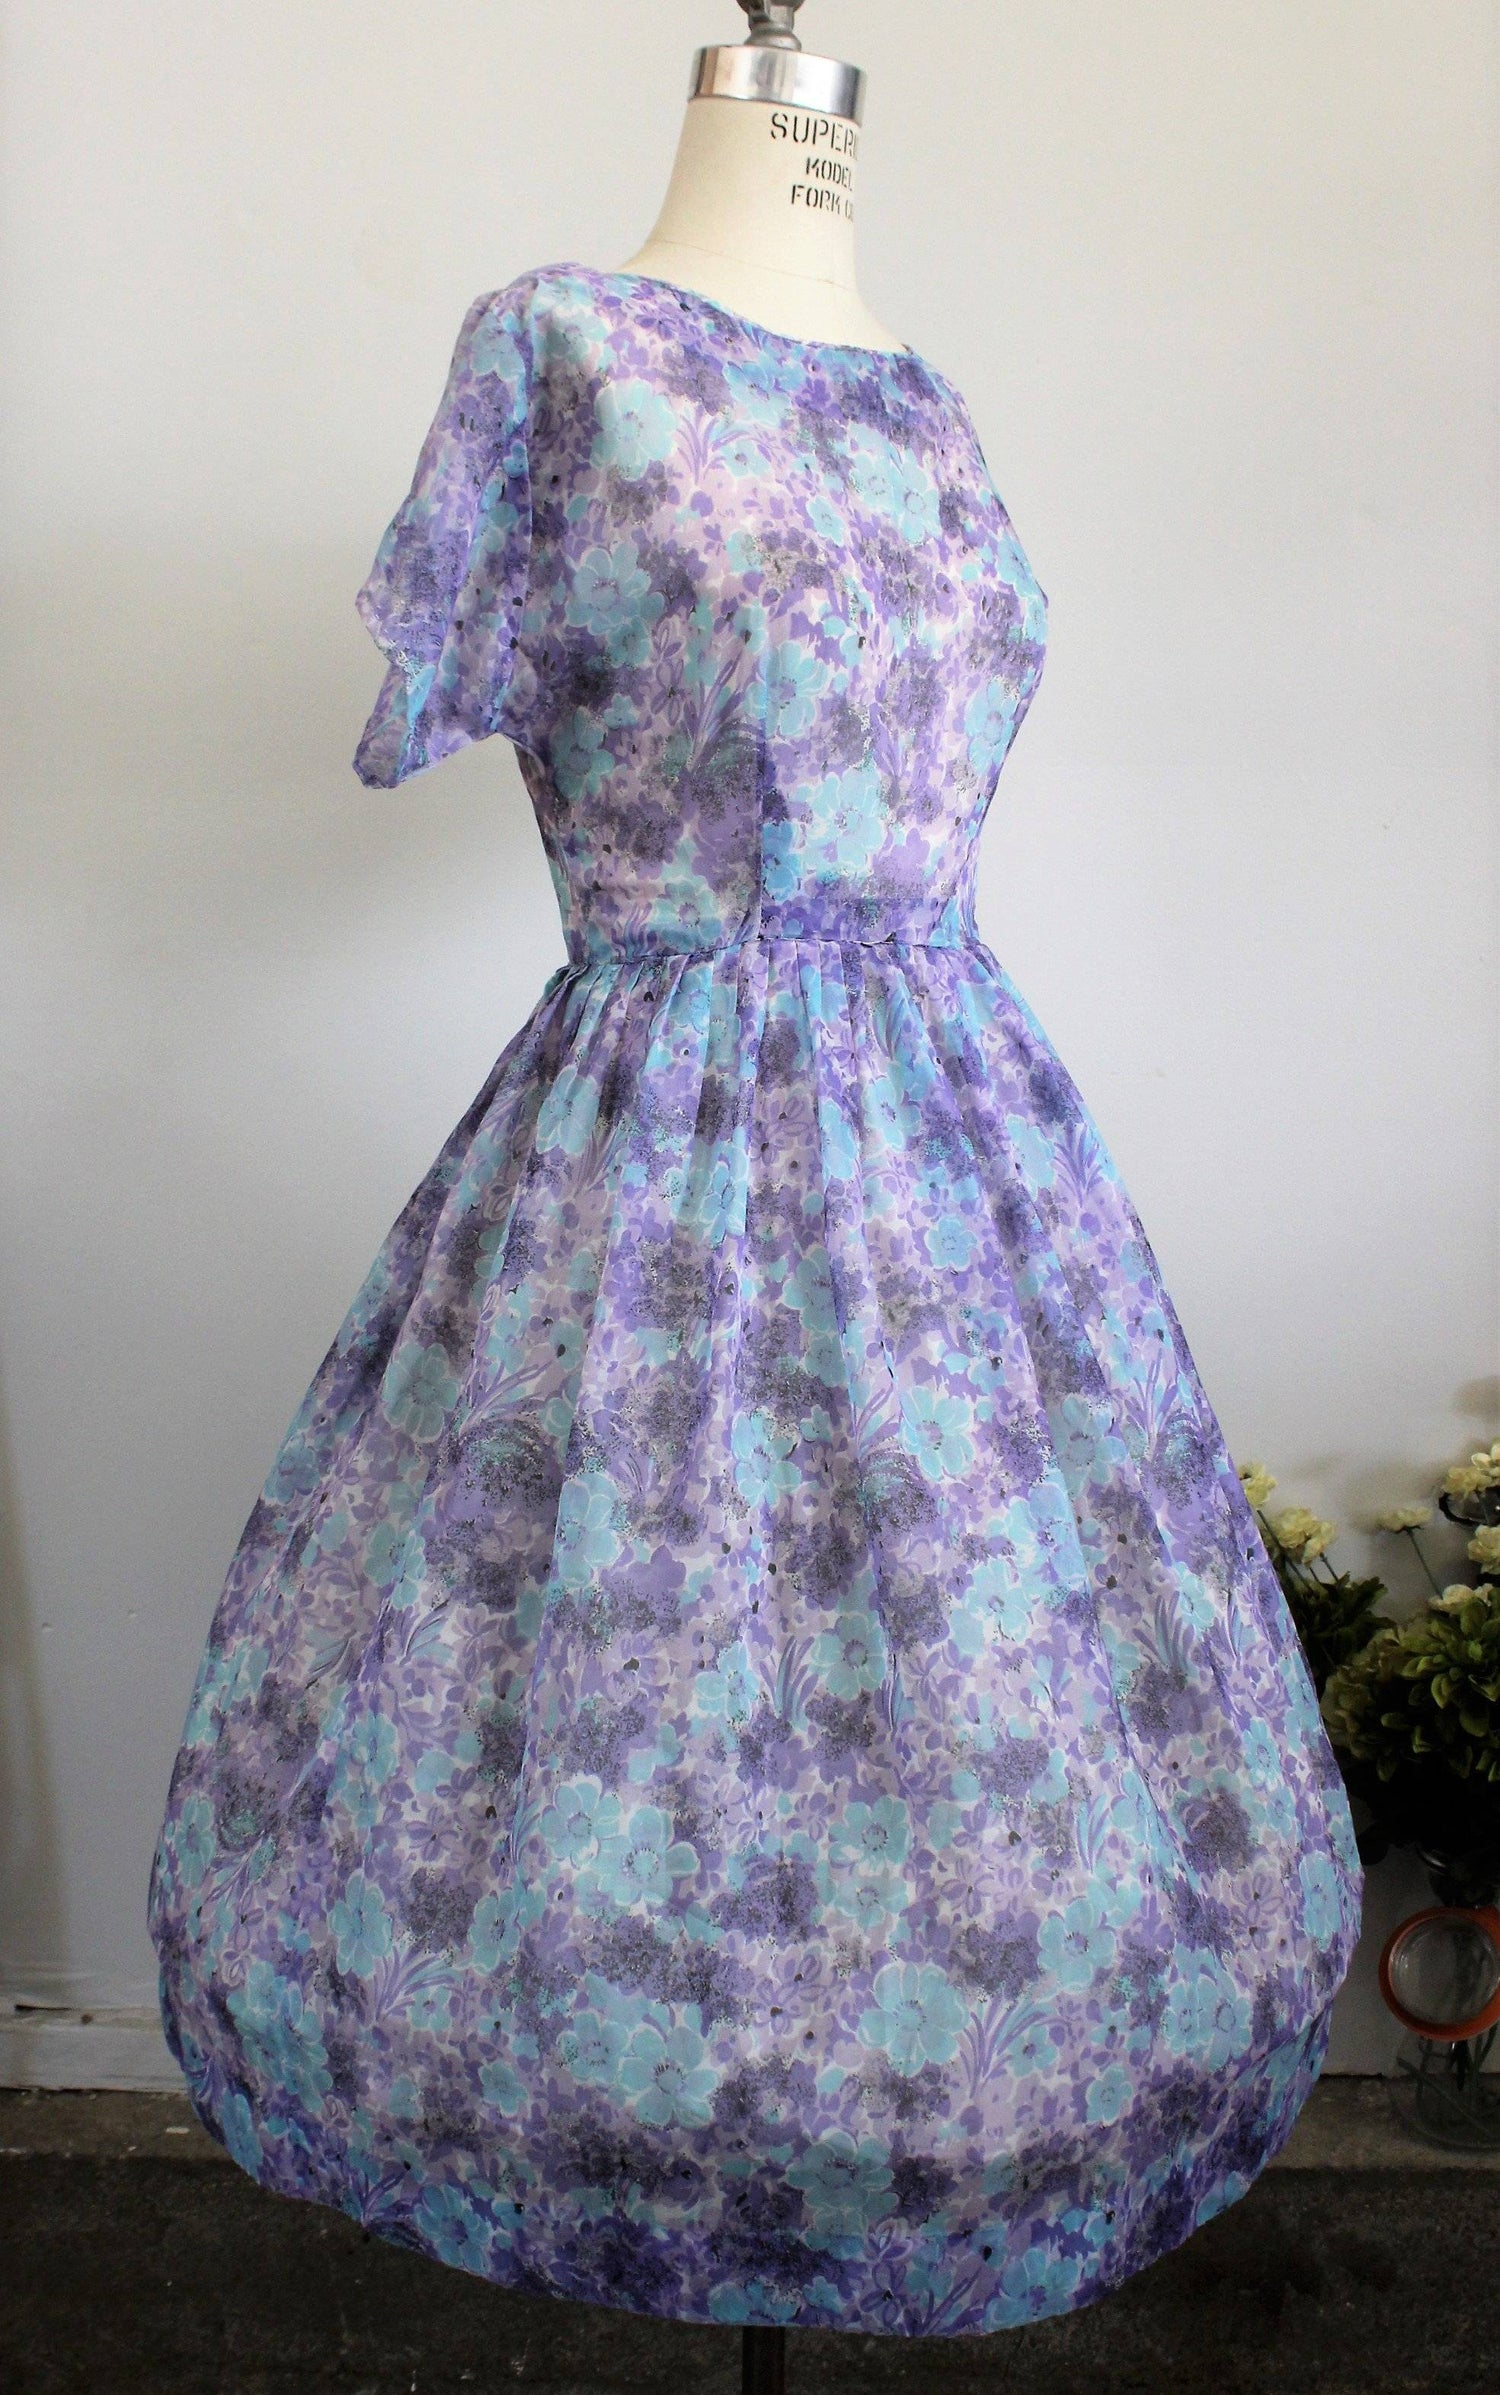 Vintage 1950s Blue and Purple Floral Print New Look Dress, Sheer Nylon-Toadstool Farm Vintage-1940s Dress,40s Clothing,40s Day Dress,40s Dress,Fit and Flare Dress,Floral Print,Full Circle Skirt,Metal Zipper,New Look Dress,Spring Dress,Summer Dress,Vintage,Vintage Clothing,Vintage Dress,Vintage Dresses